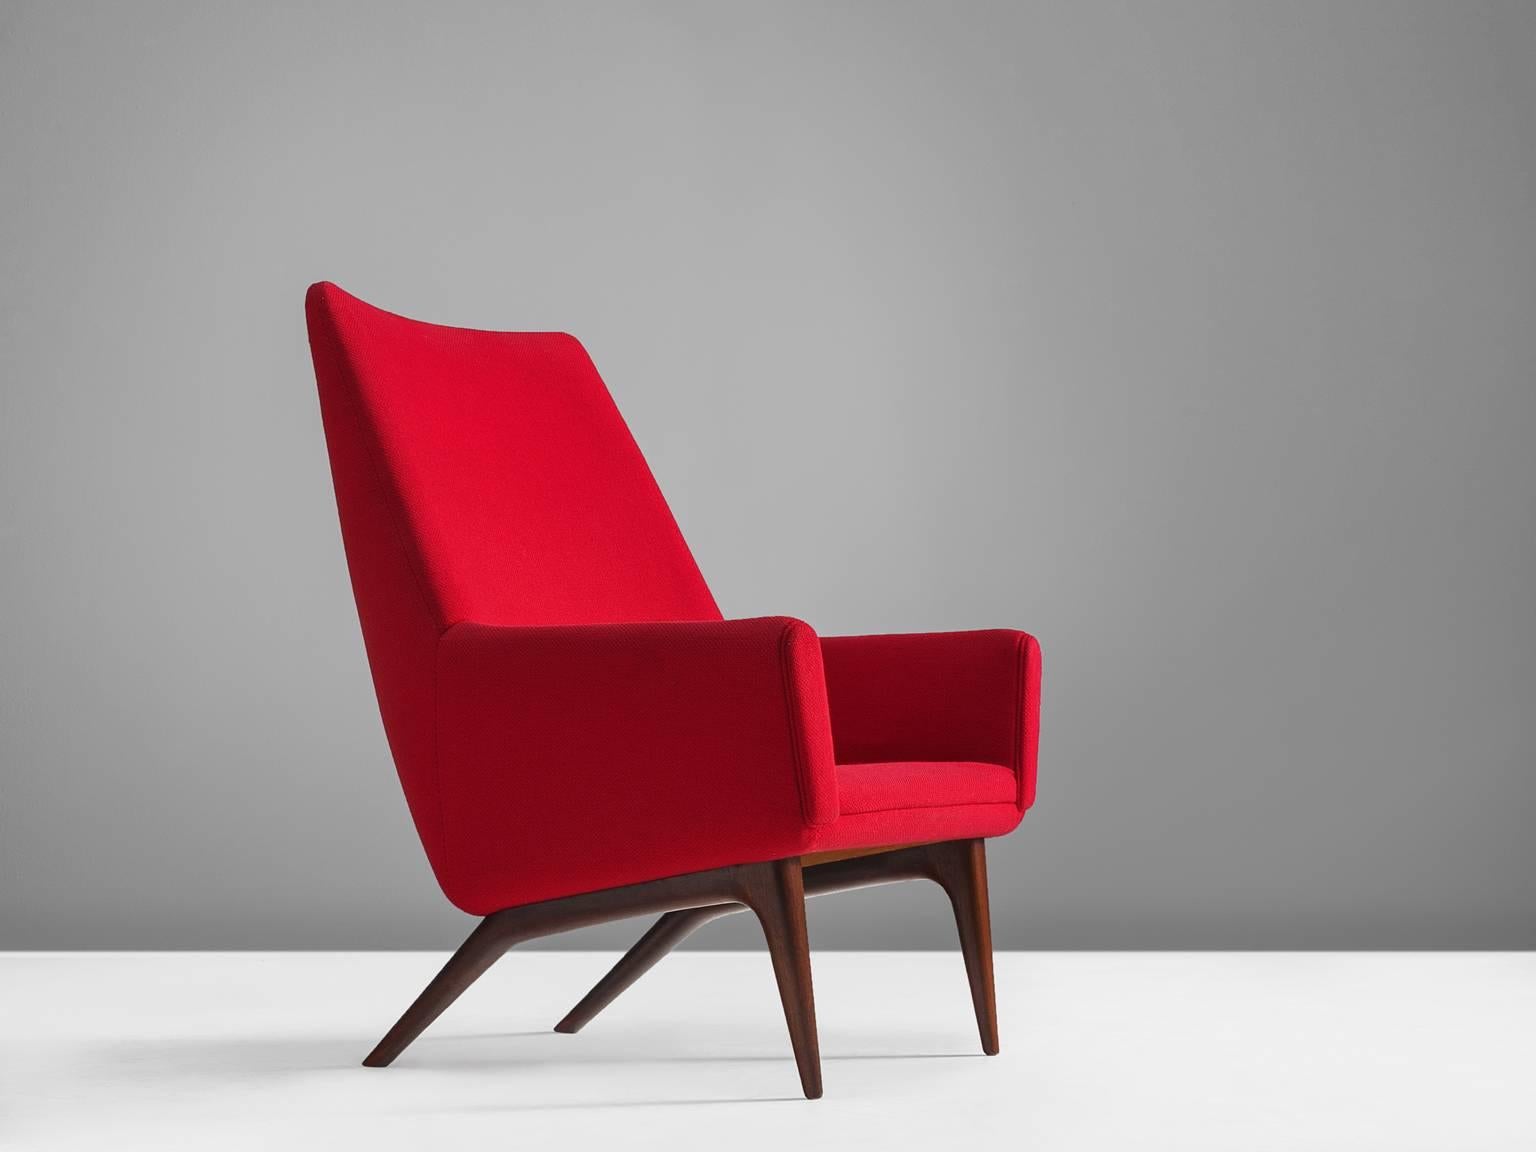 Lounge chair, red fabric and wood, Denmark, 1960s

This armchair with tilted back features clean lines and geometric shapes combined with playful, tapered legs that show a reference to saber legs. The style of this chair shows traits of the designs